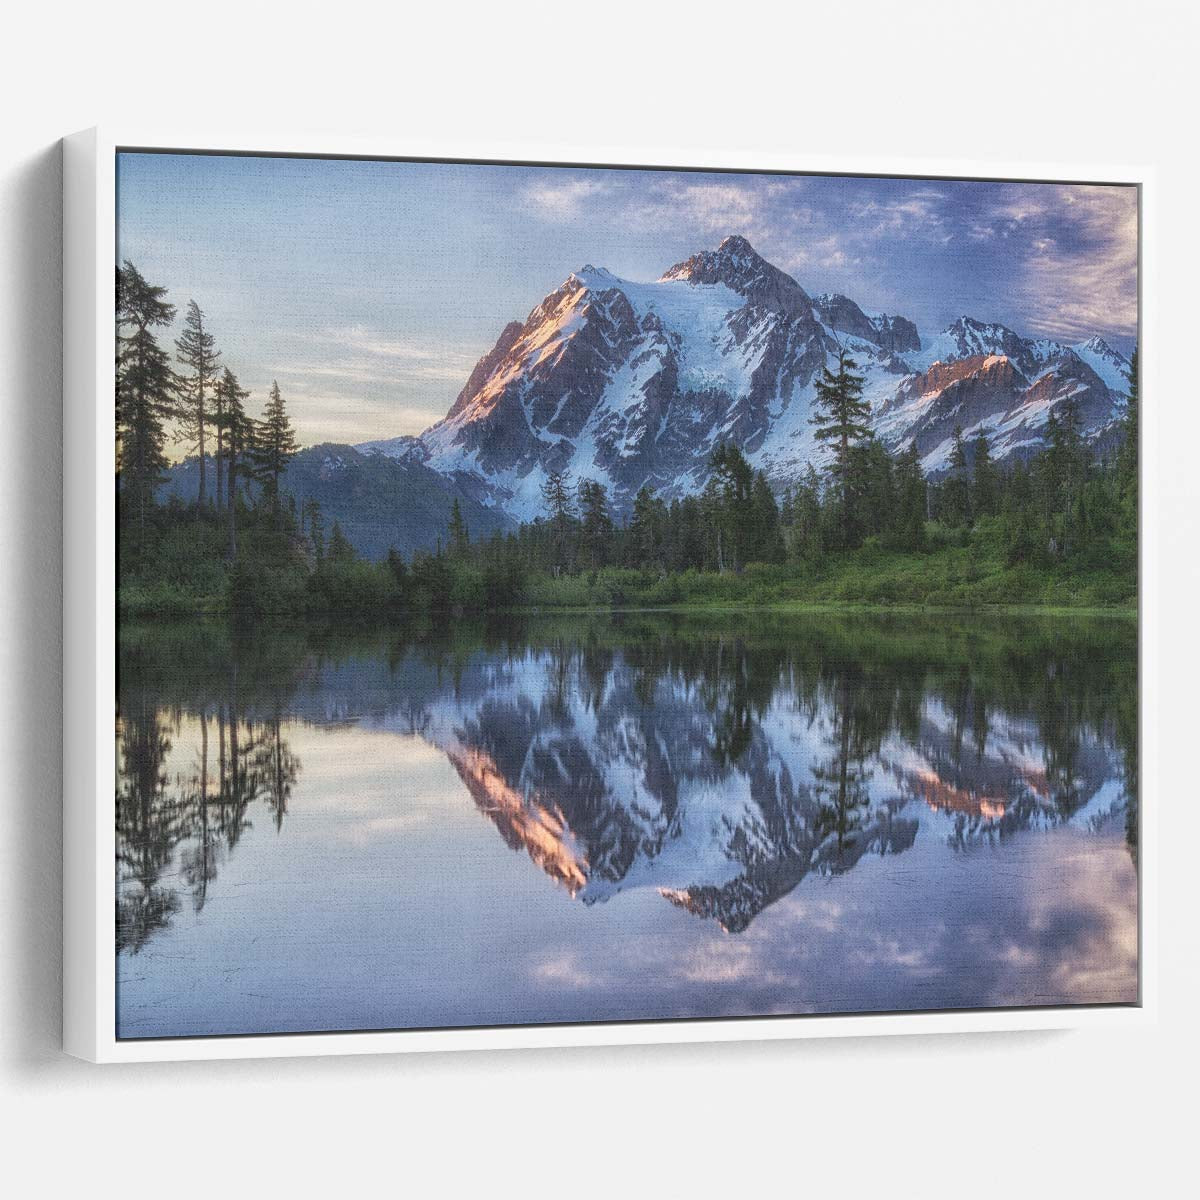 Sunrise Over Snowy Mount Shuksan Reflection Wall Art by Luxuriance Designs. Made in USA.